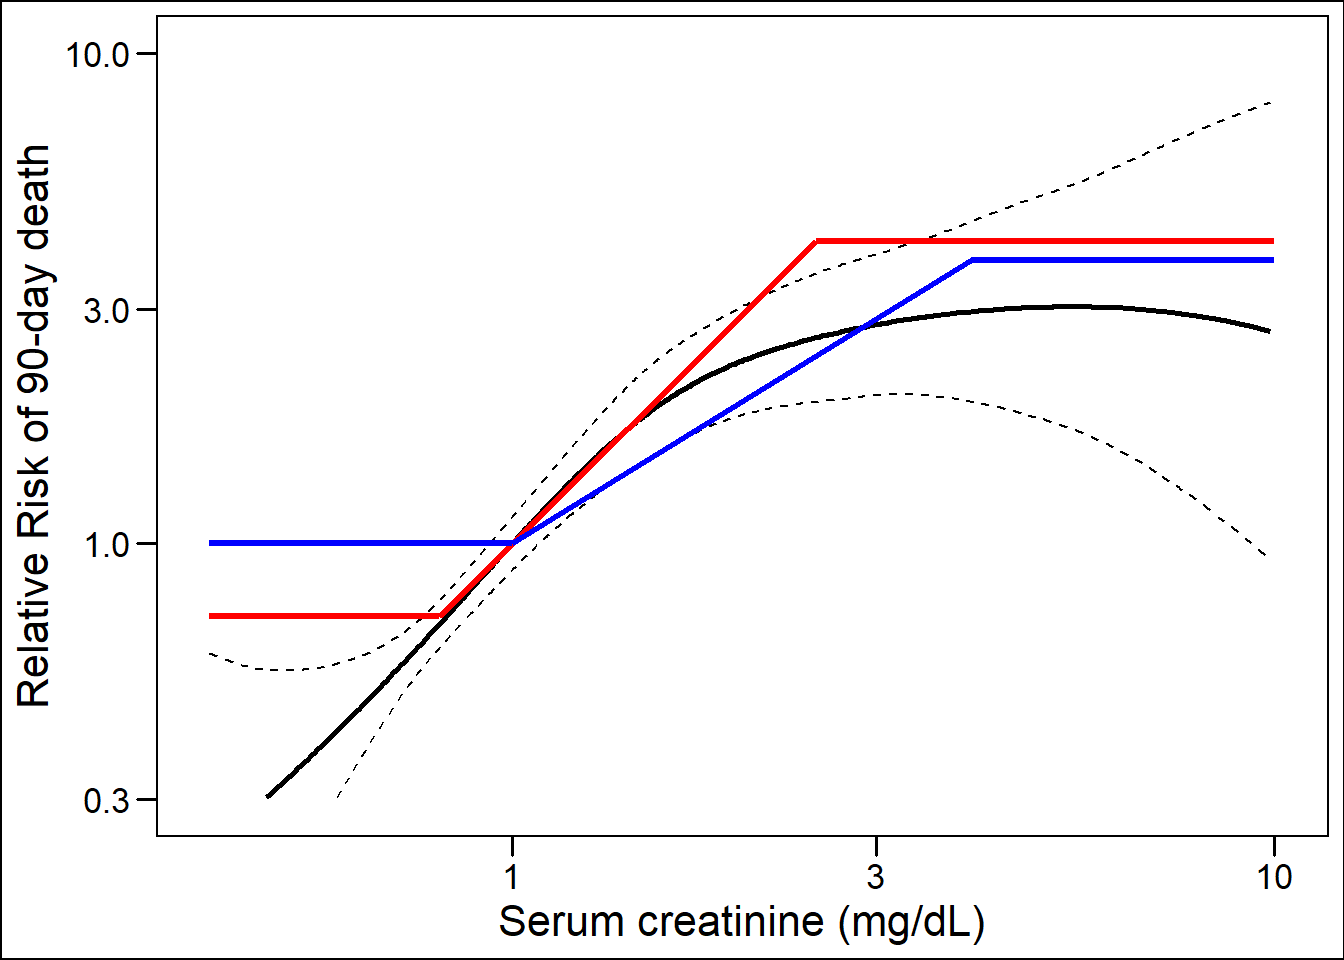 In the validation data, the relation with 90-day mortality is shown. The coefficients and boundaries of creatinine in reMELD (red) and UNOS-MELD (blue) illustrate model fit.